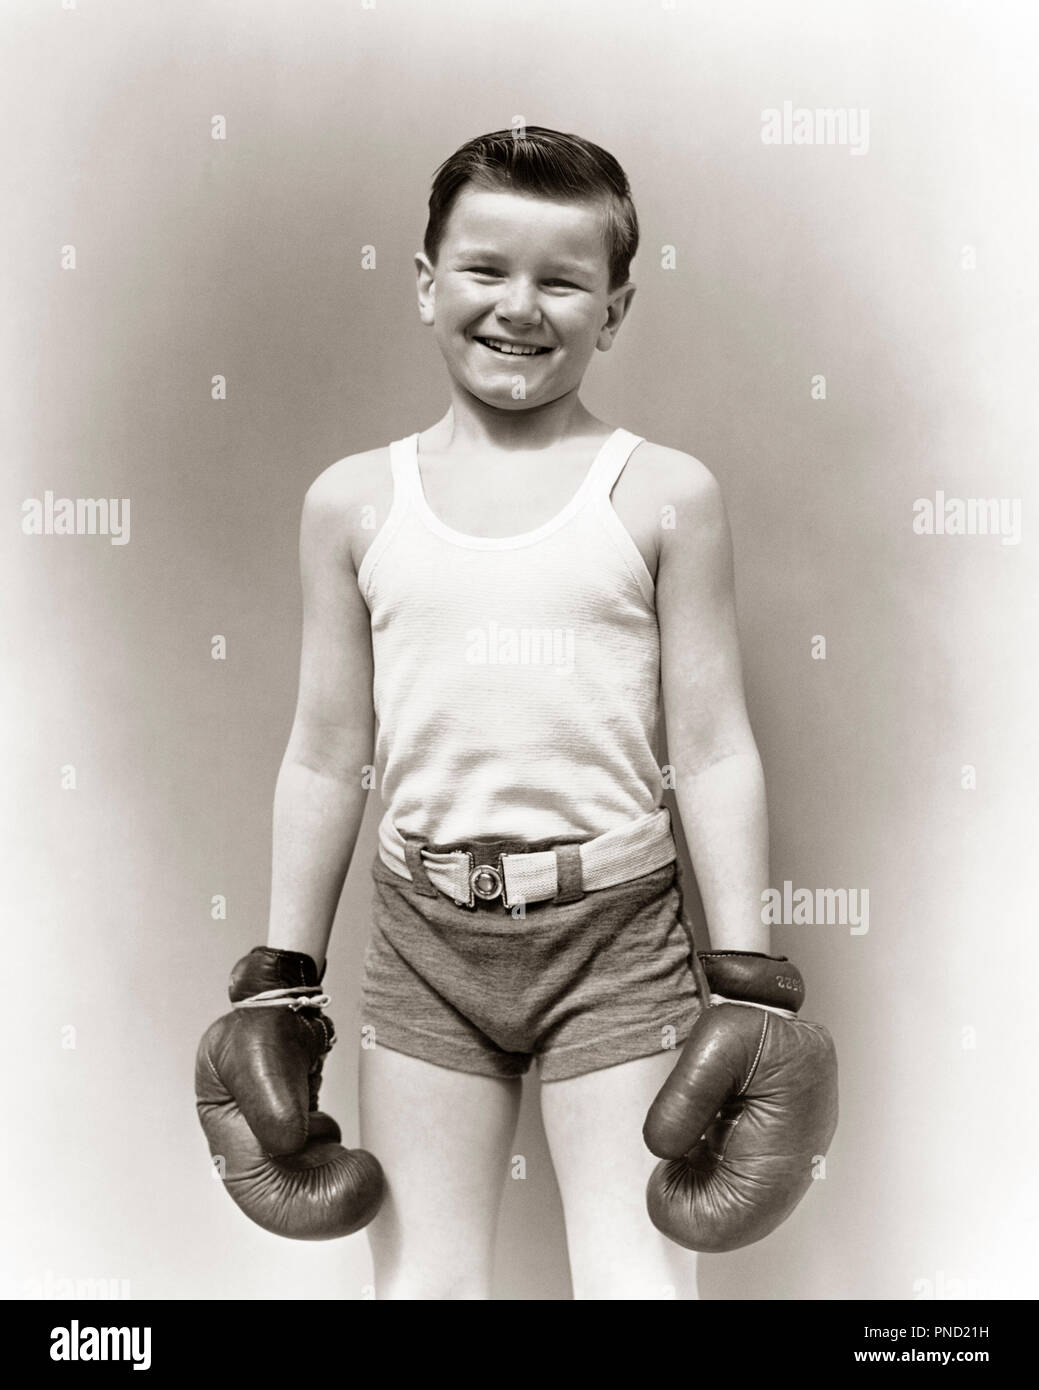 1930s SMILING BOY IN T-SHIRT AND GYM SHORTS STANDING LOOKING AT CAMERA  WEARING BOXING GLOVES READY FOR A FIGHT - j1977 HAR001 HARS FITNESS SHORTS  JUVENILE STYLE FEAR HEALTHY BALANCE SAFETY COMPETITION